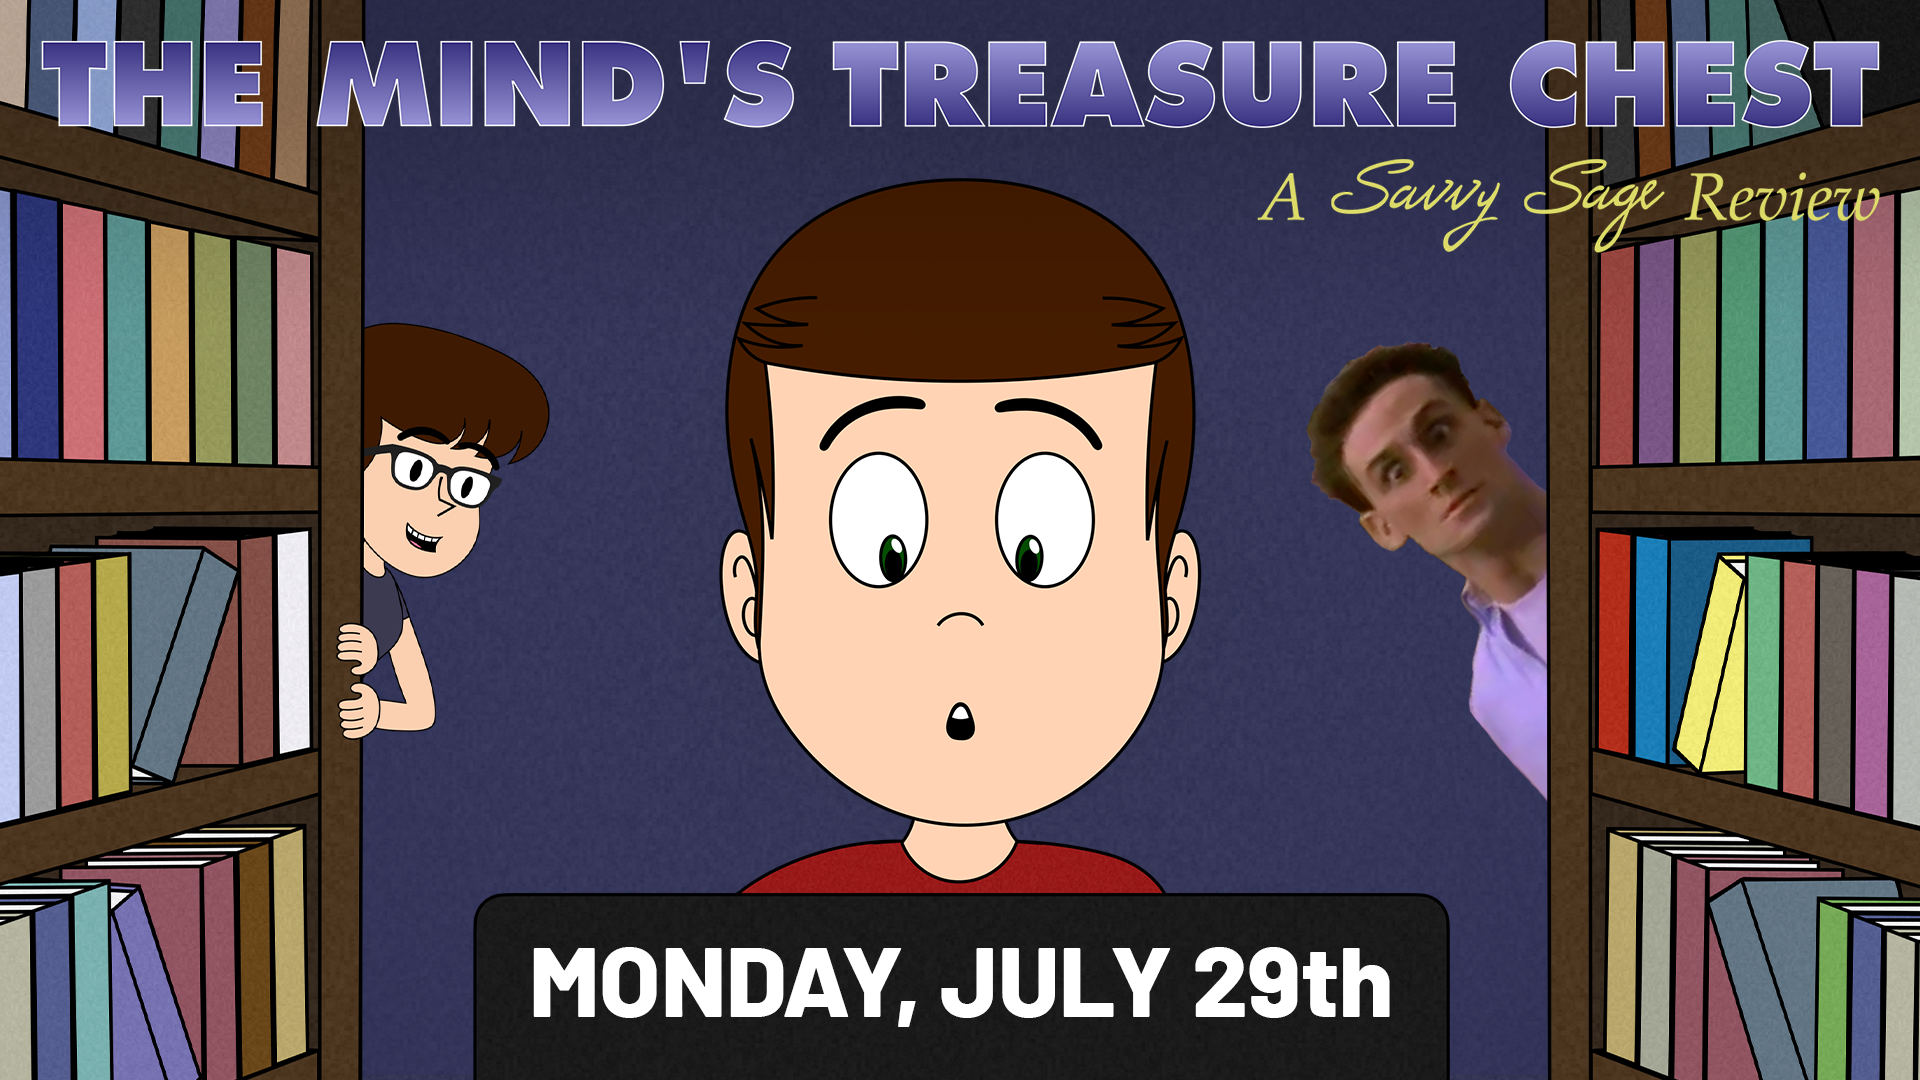 A thumbnail where we see Savvy Sage looking surprised at a flat-screen monitor. The back of the monitor reads "MONDAY, JULY 29th". In-between him are a pair of bookshelves—behind the left bookshelf is a woman sporting glasses and a purple-grayish T-shirt peaking through. Behind the right bookshelf is Jack Patterson (from the aforementioned film) staring at the viewer. At the top is the title of the episode: THE MIND'S TREASURE CHEST - A Savvy Sage Review.